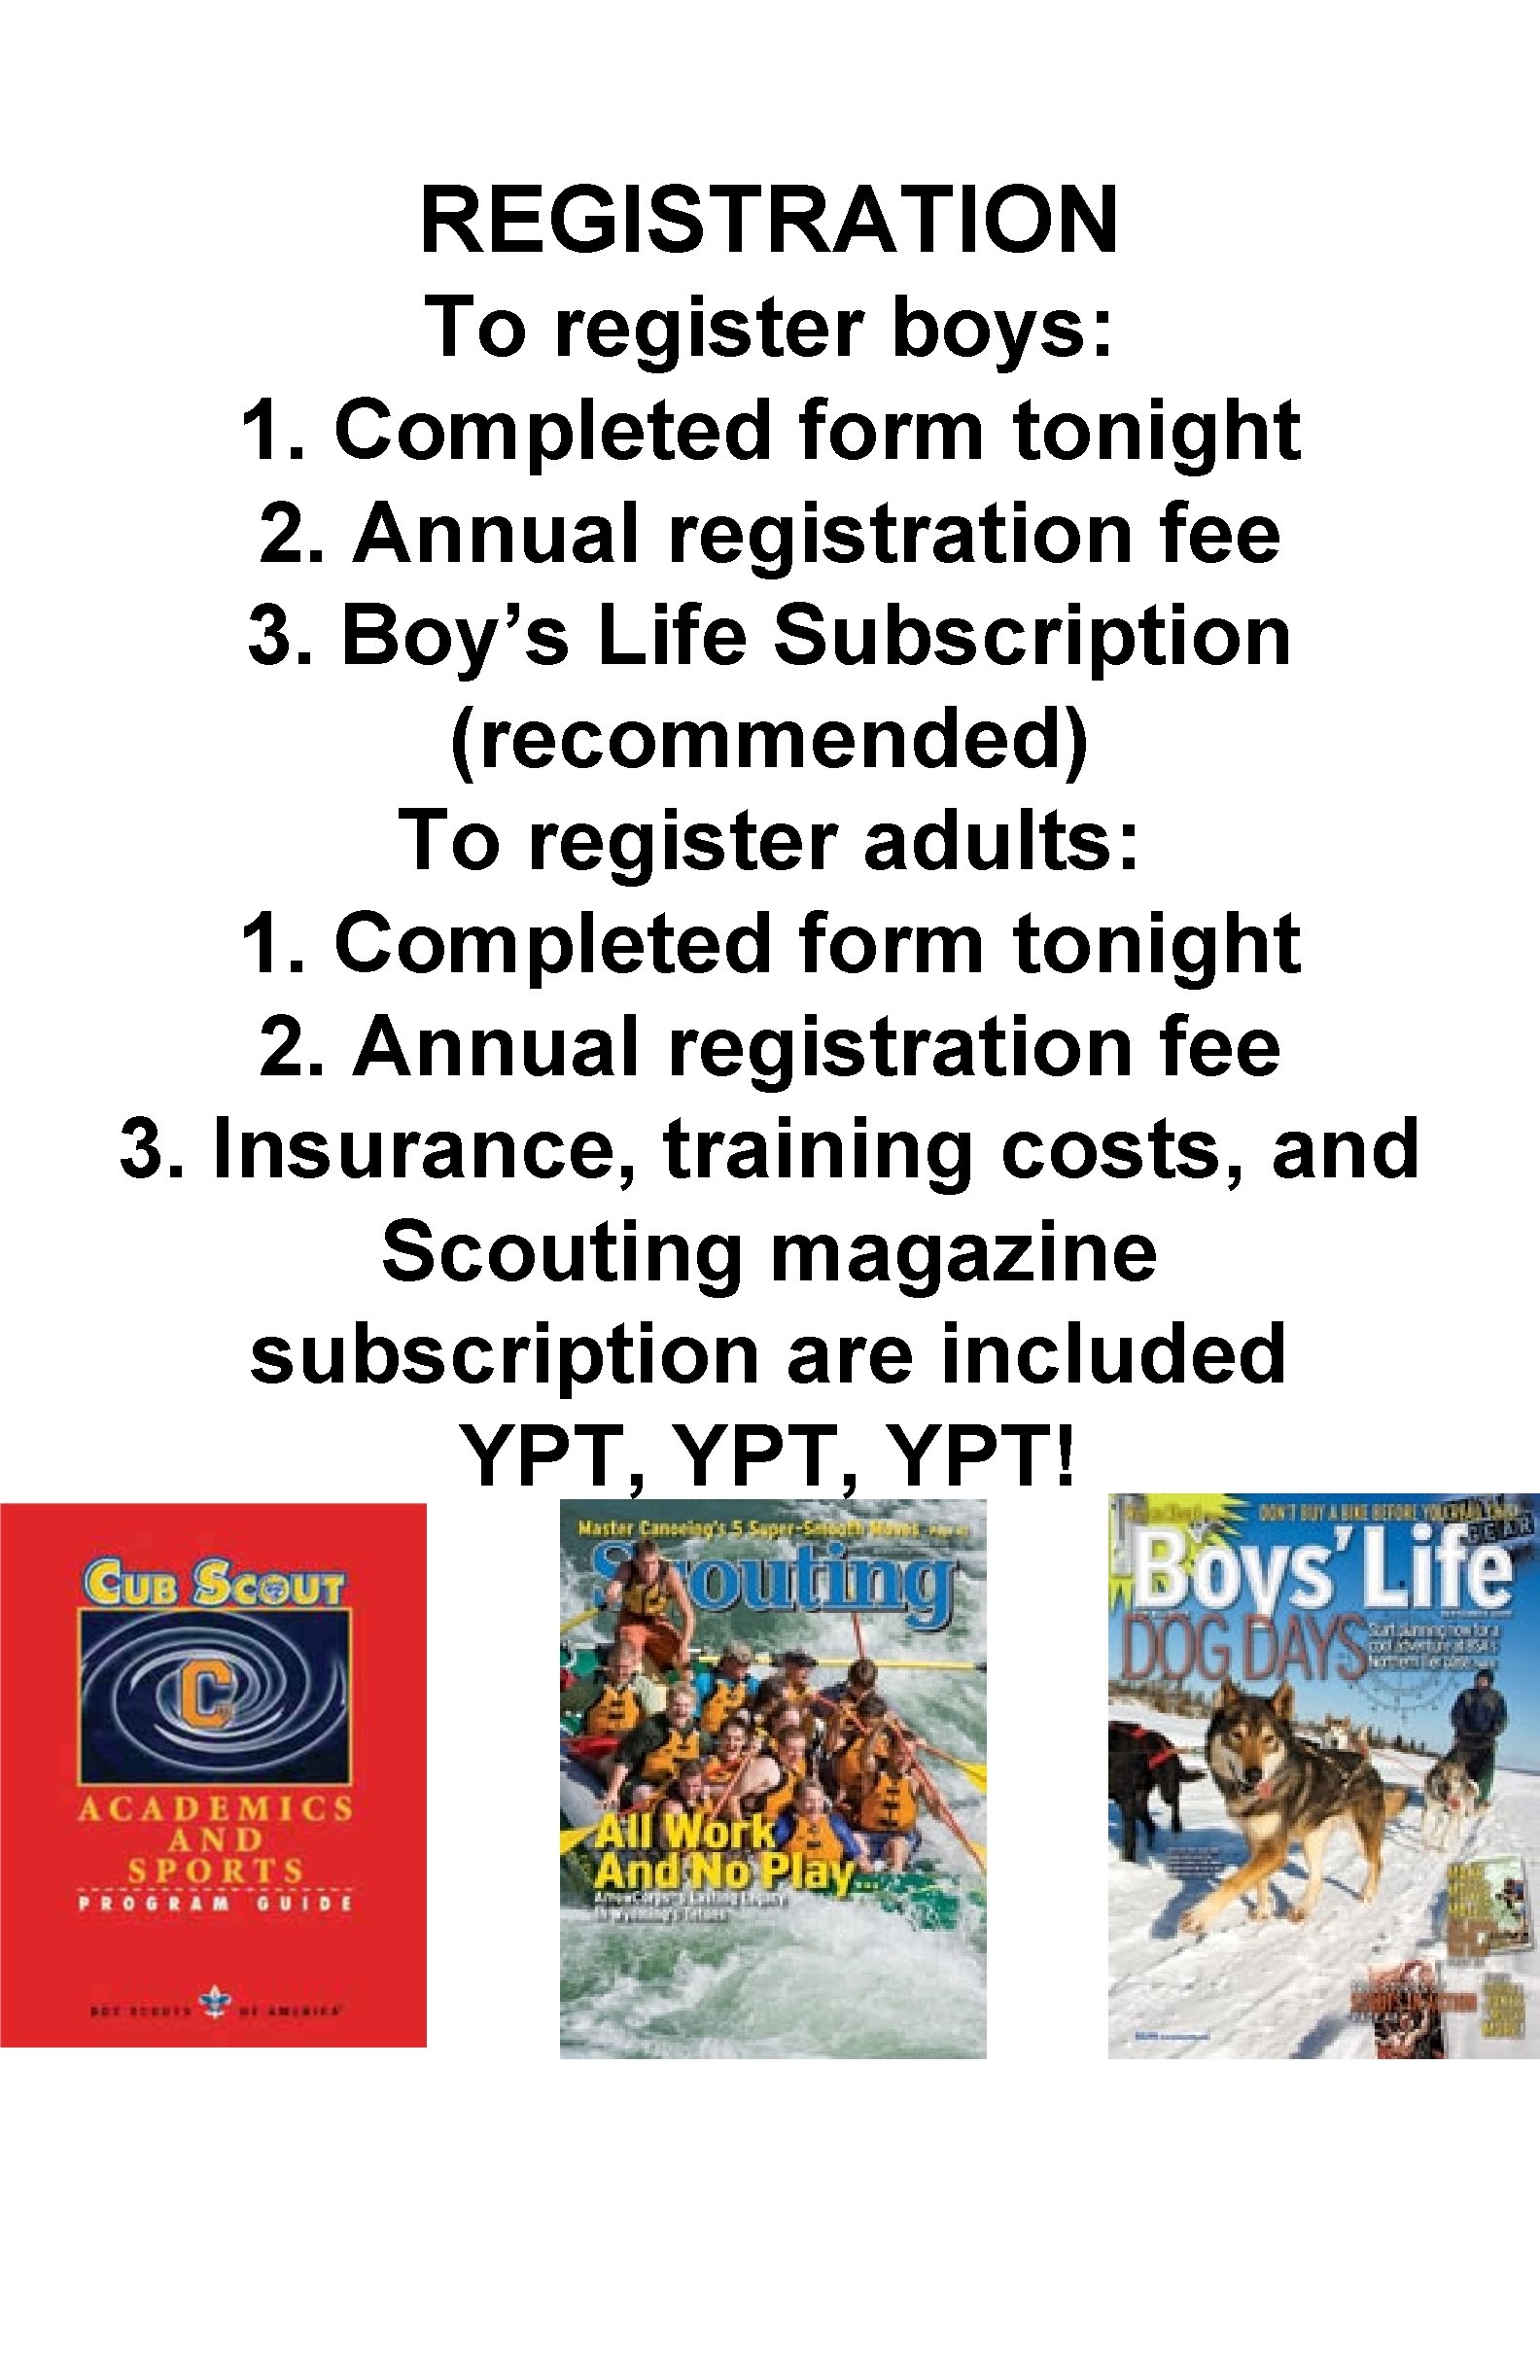 REGISTRATION To register boys: 1. Completed form tonight 2. Annual registration fee 3. Boy’s